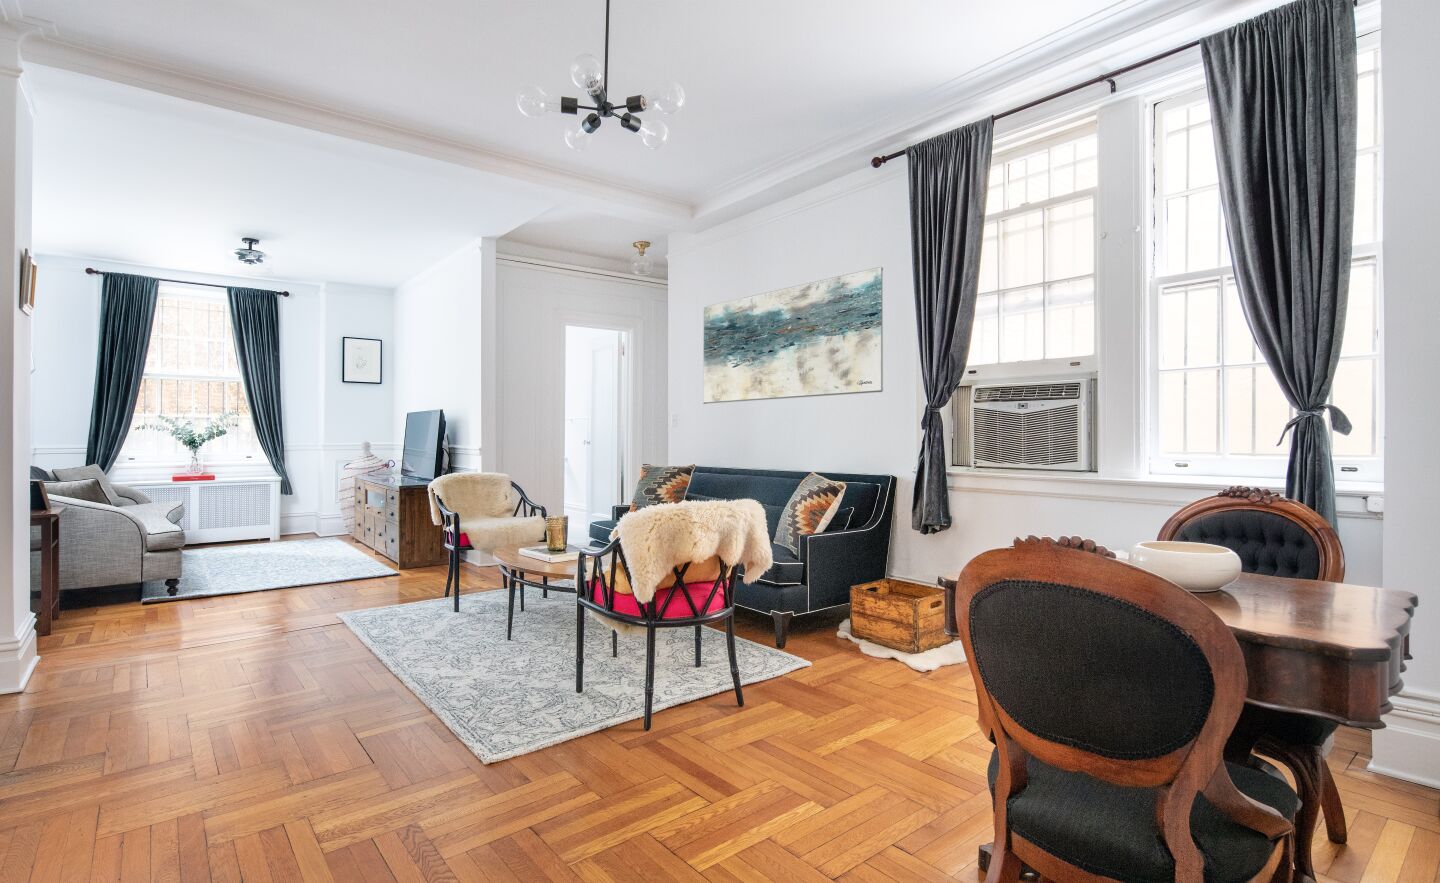 The two-bedroom, one-bathroom apartment features restored hardwood floors and original wainscoting across 1,100 square feet.